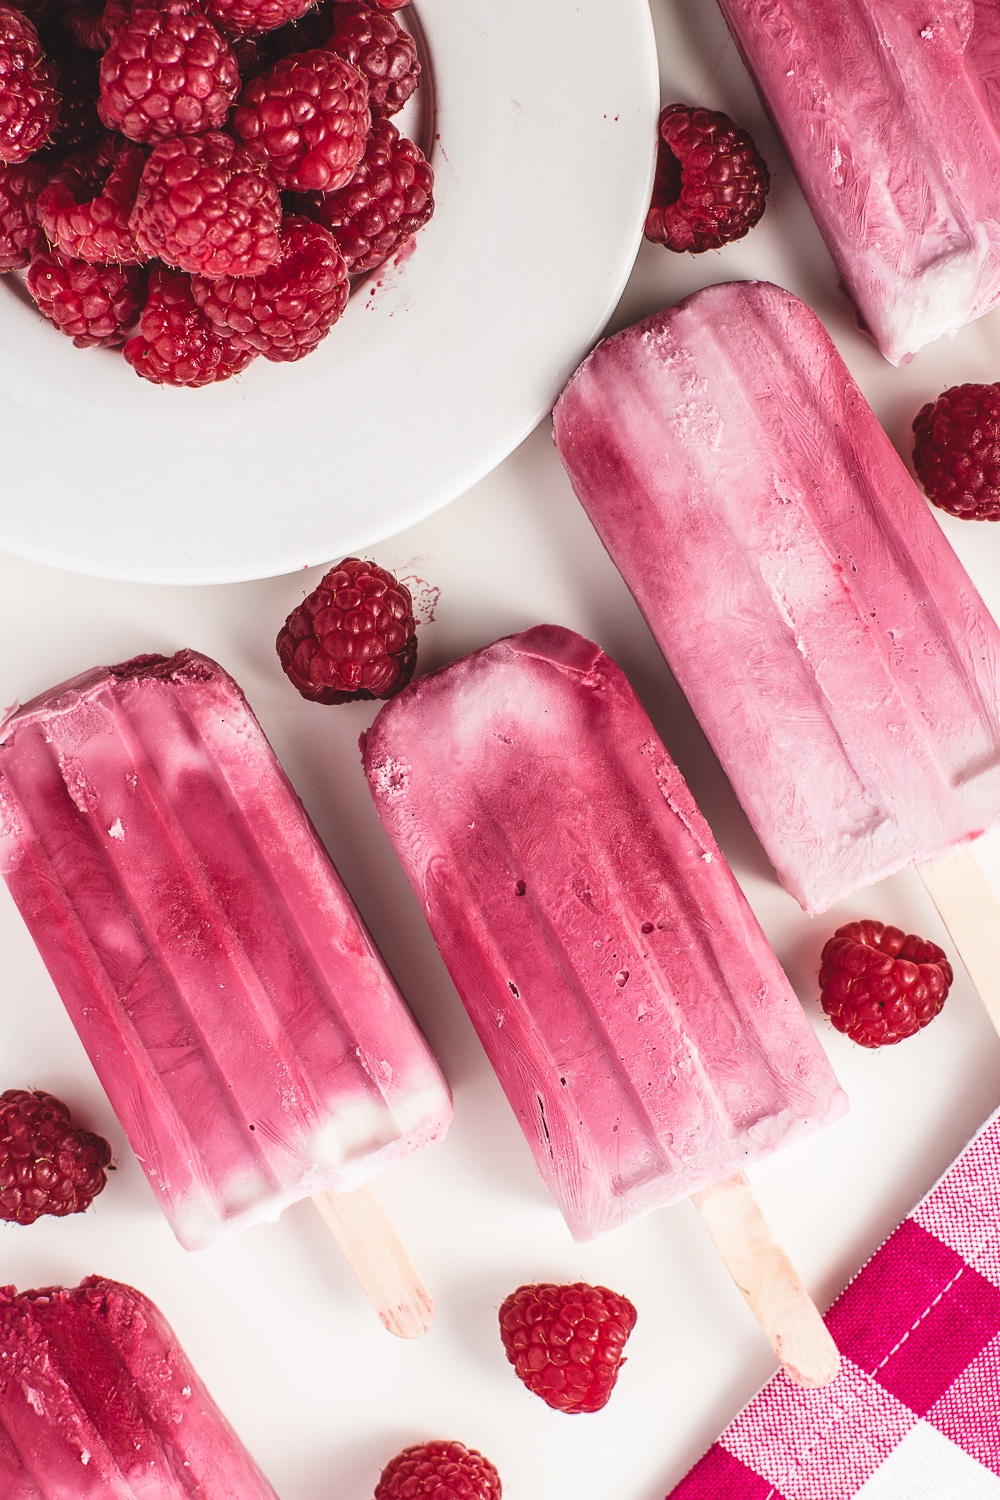 top down photo of bright pink raspberry ripple ice cream bars and a bowl of fresh raspberries